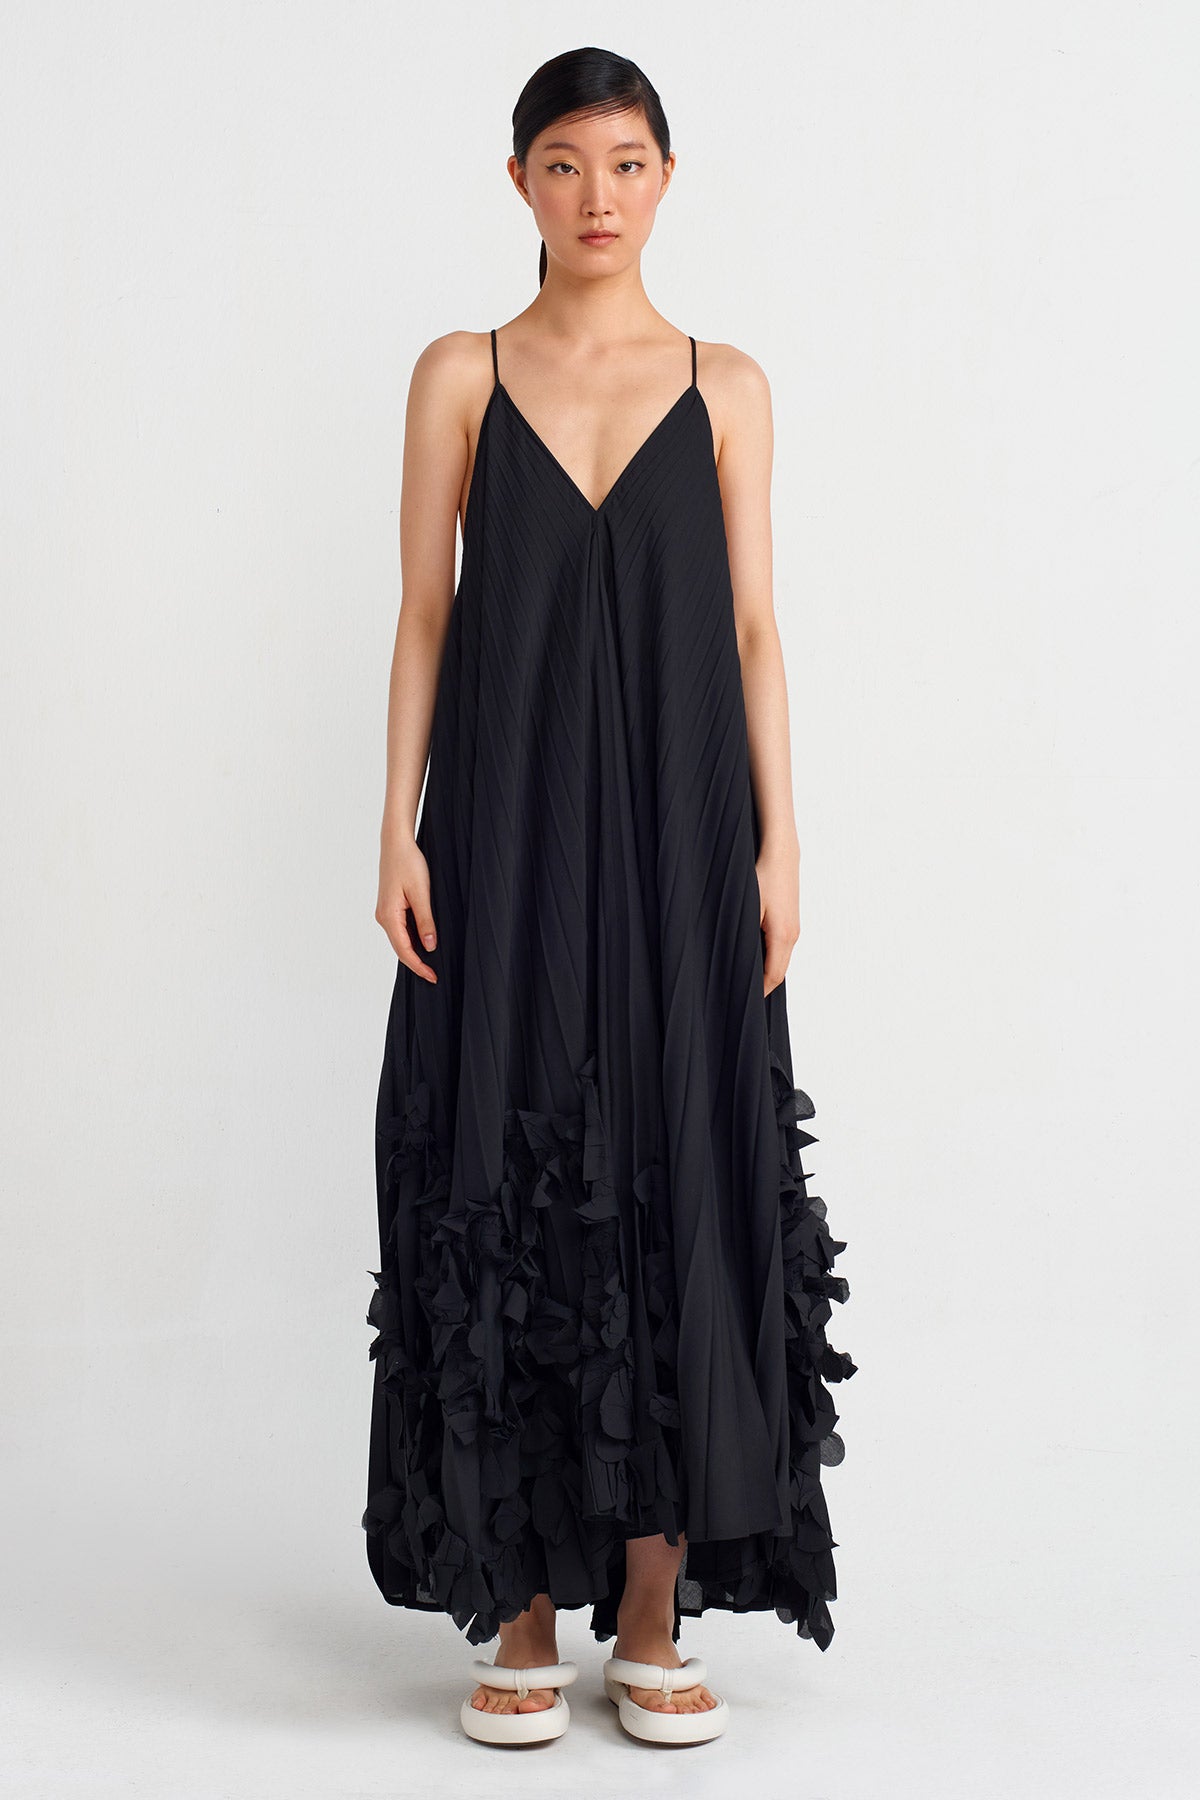 Black Pleated Dress with Flower Motif Skirt-Y244014147